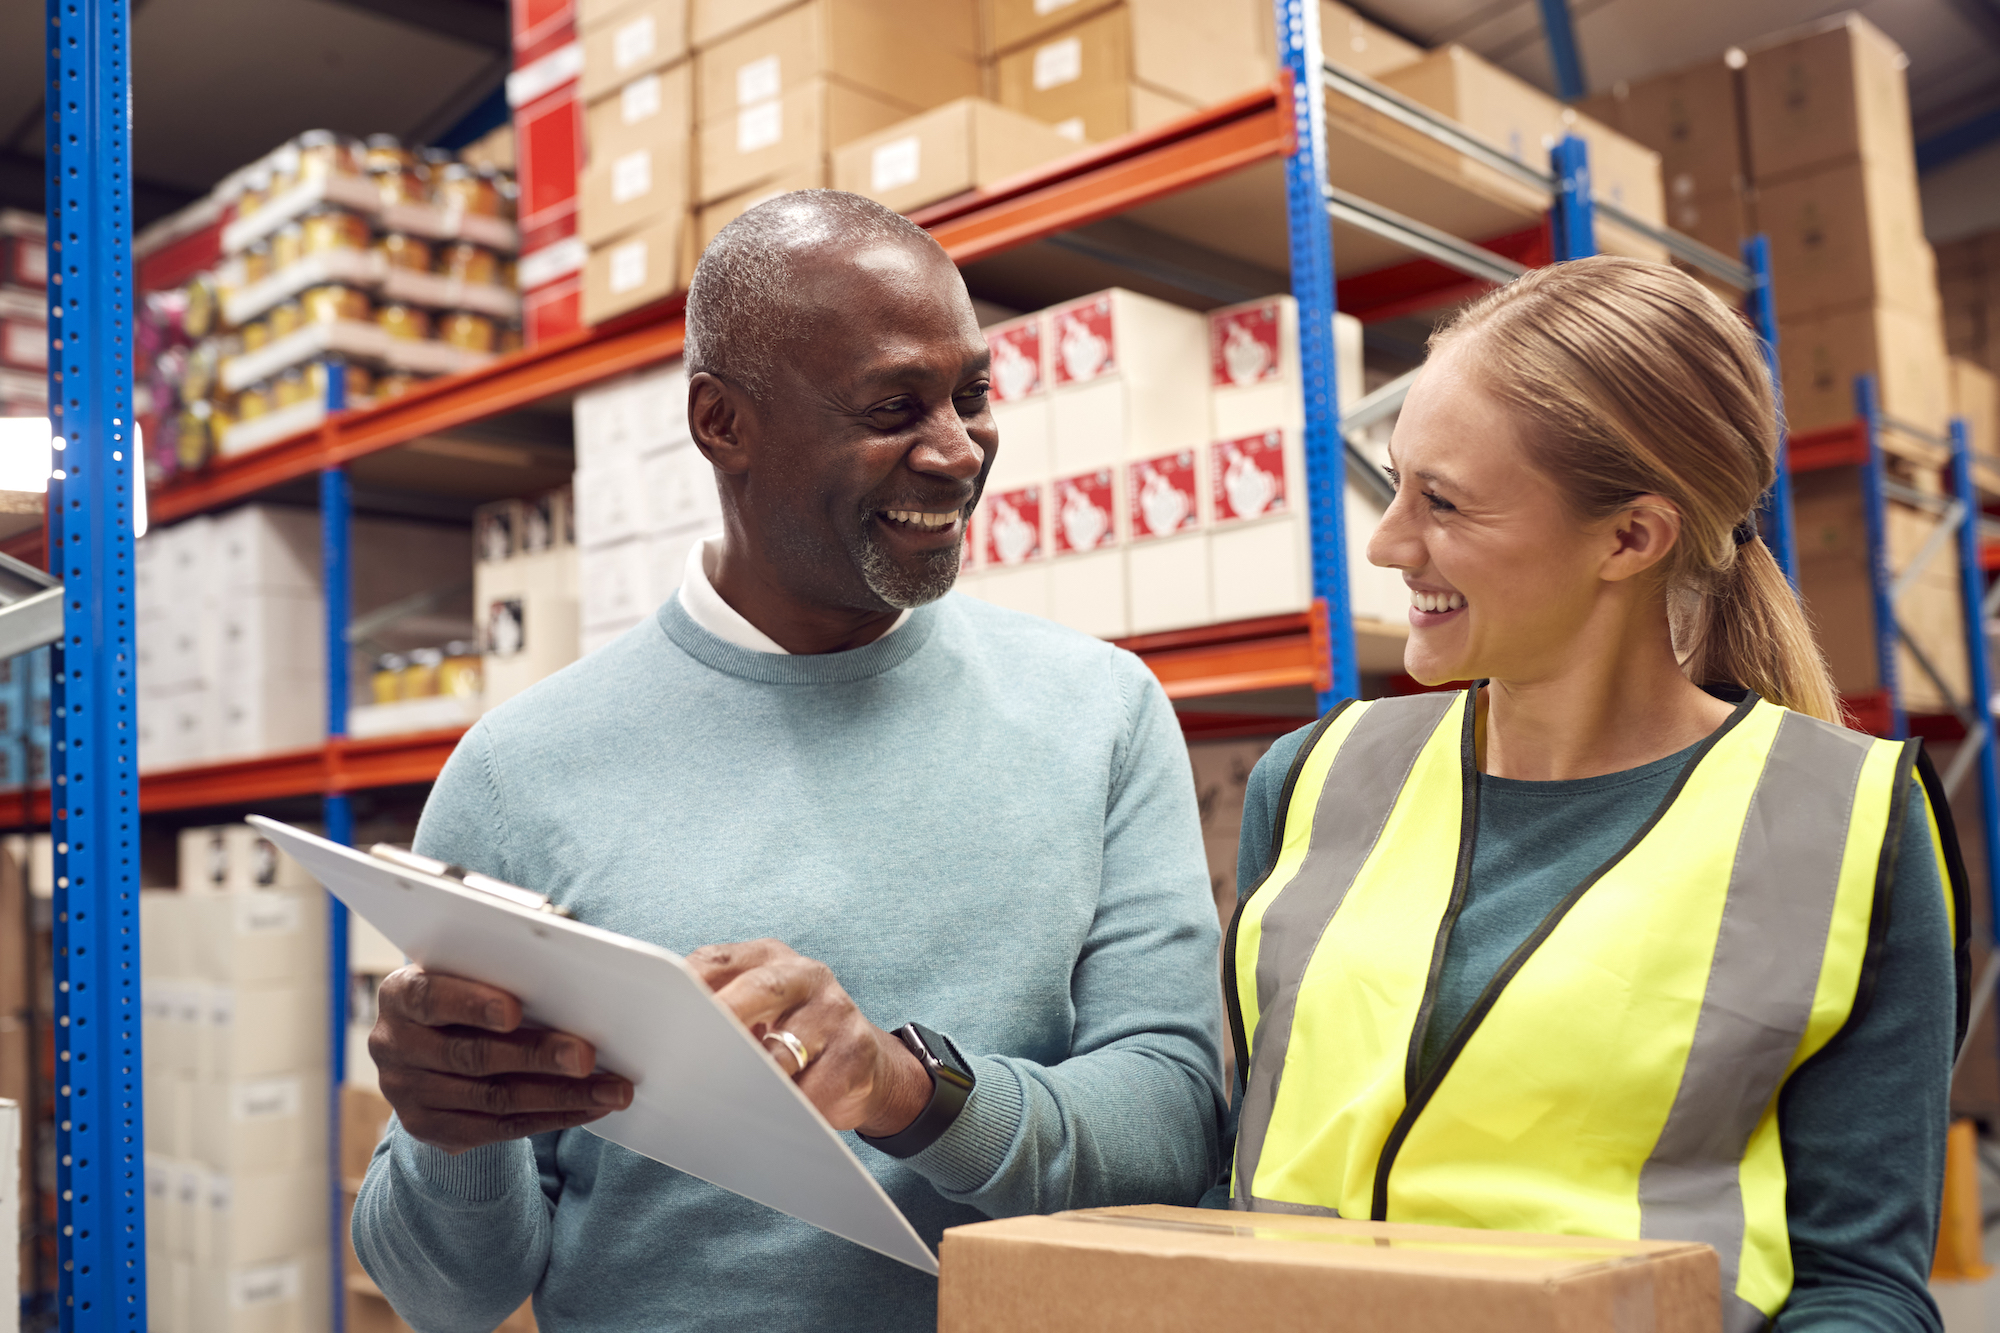 Male Team Leader With Clipboard In Warehouse Training Intern Standing By Shelves